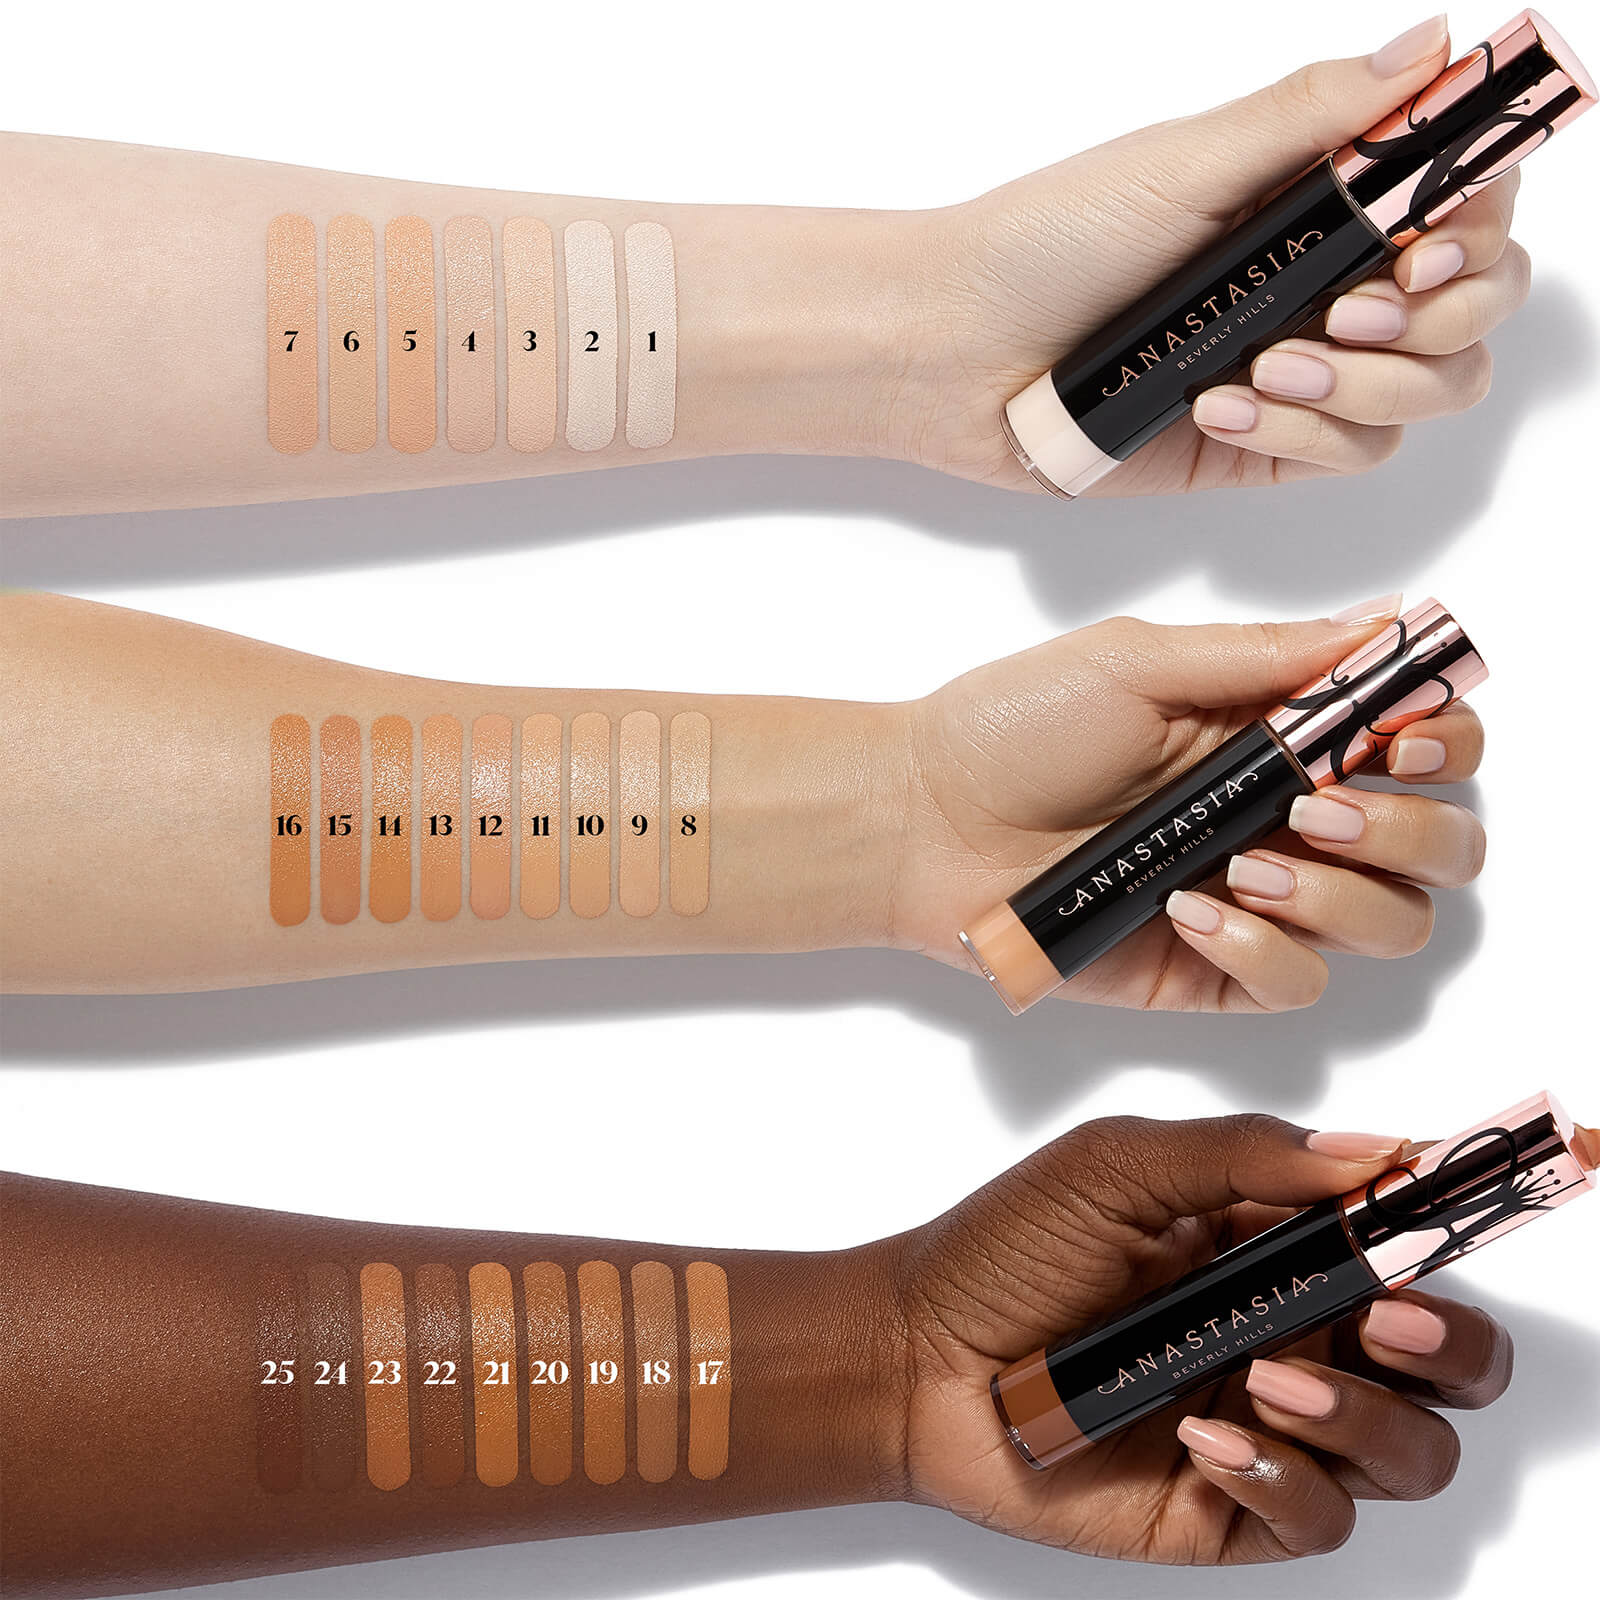 Touch Concealer shades